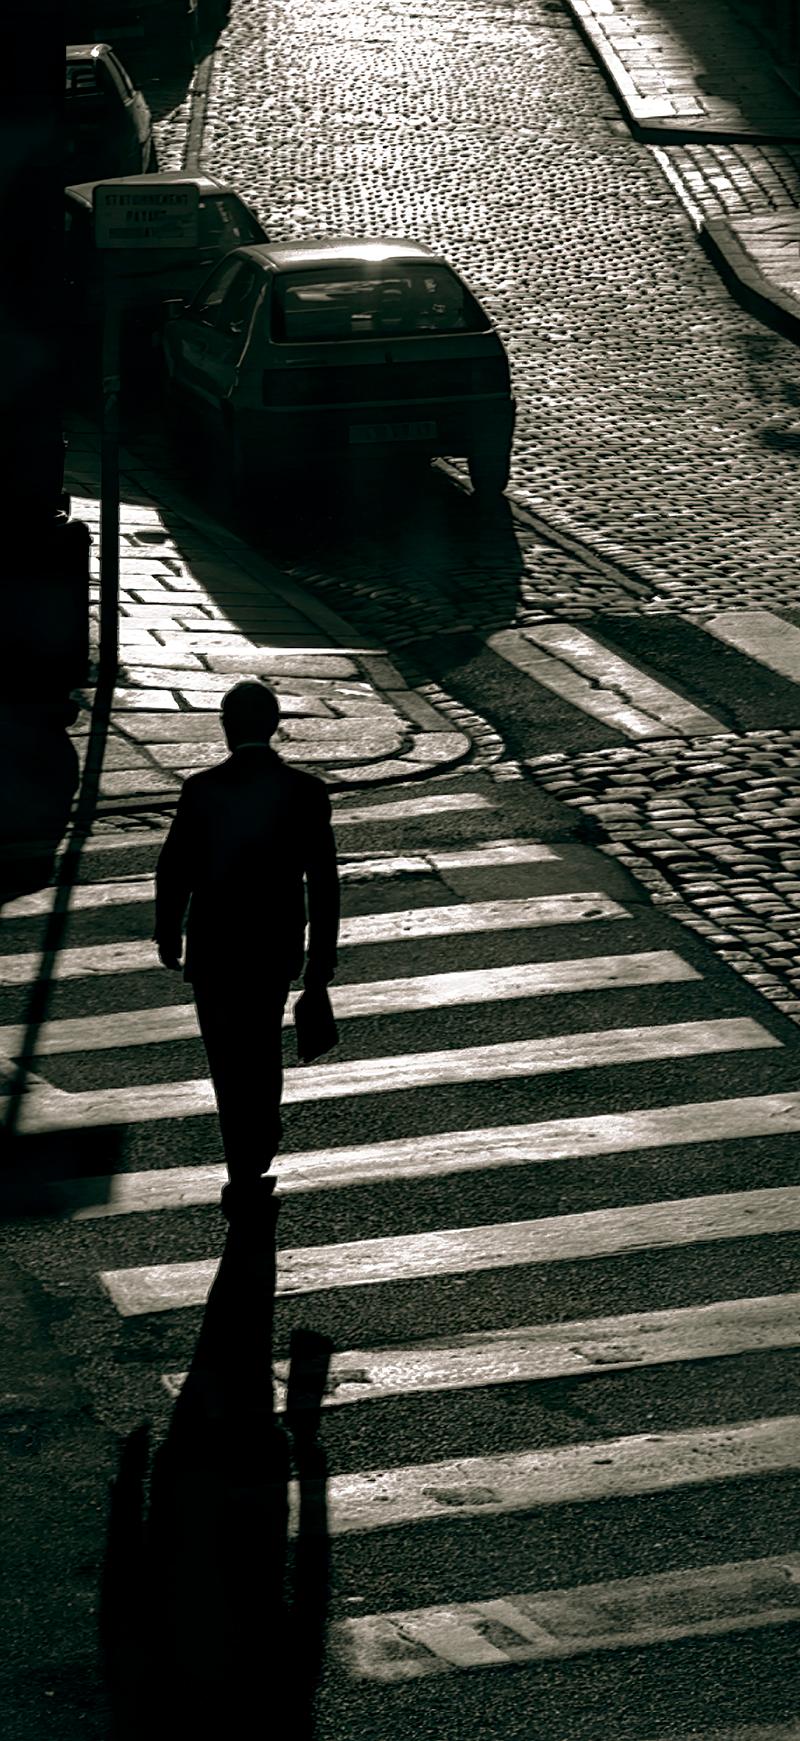 Man walking - Limited edition pigment print  -   Limited Editions of 5
France, 2003

This is an Archival Pigment print on fiber based paper ( Hahnemühle Photo Rag® Baryta 315 gsm , Acid-free and lignin-free paper, Museum quality paper for highest